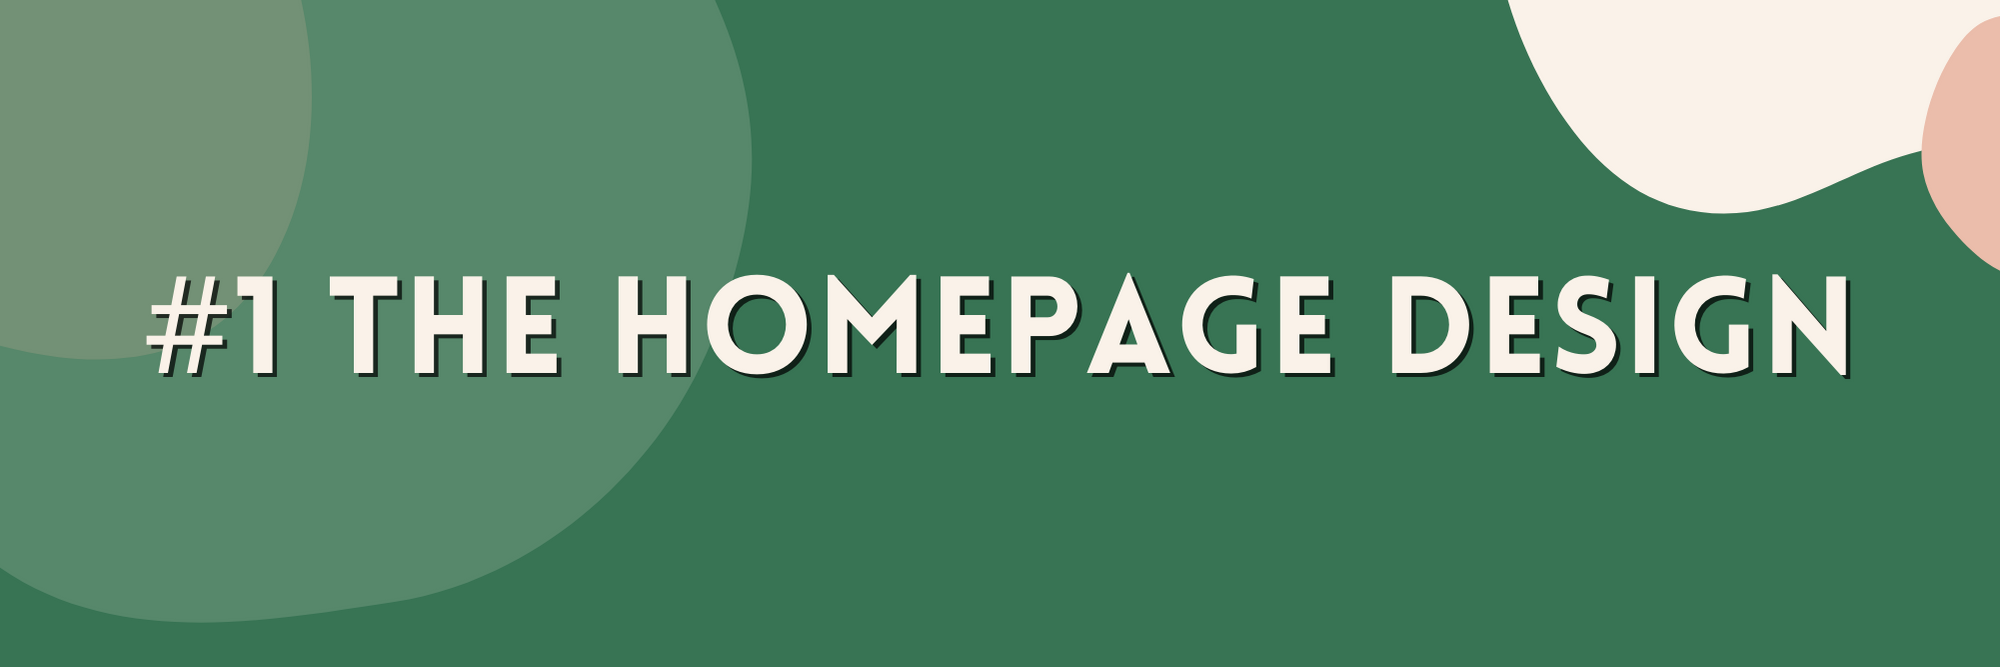 the homepage design